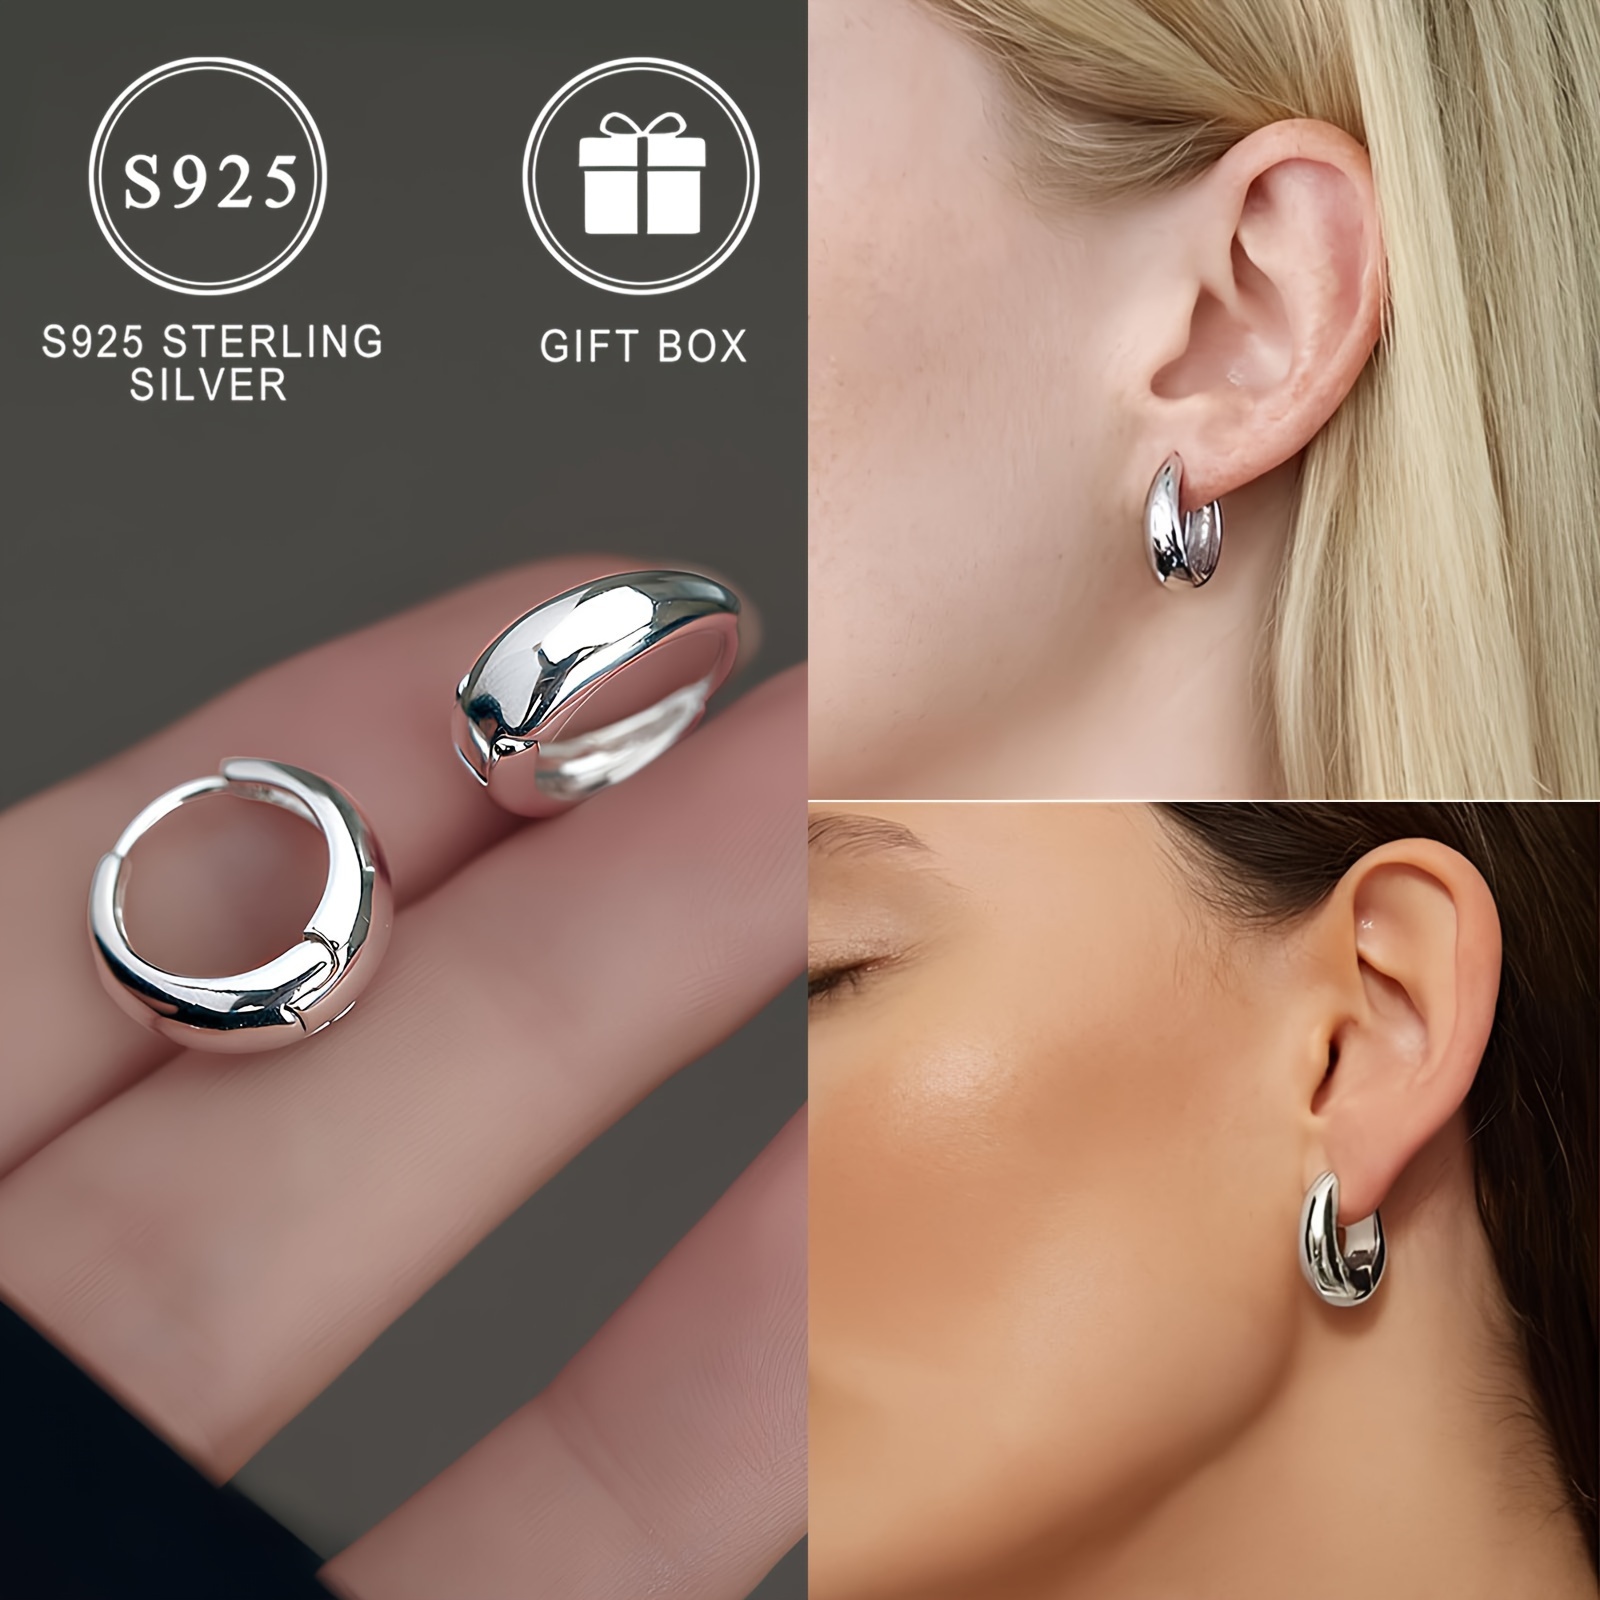 

Elegant 925 Sterling Silver Hoop Earrings, Hypoallergenic Plated, Fashion Minimalist Design, High-quality Polished Finish, Daily Party Wear, Gift Box Included